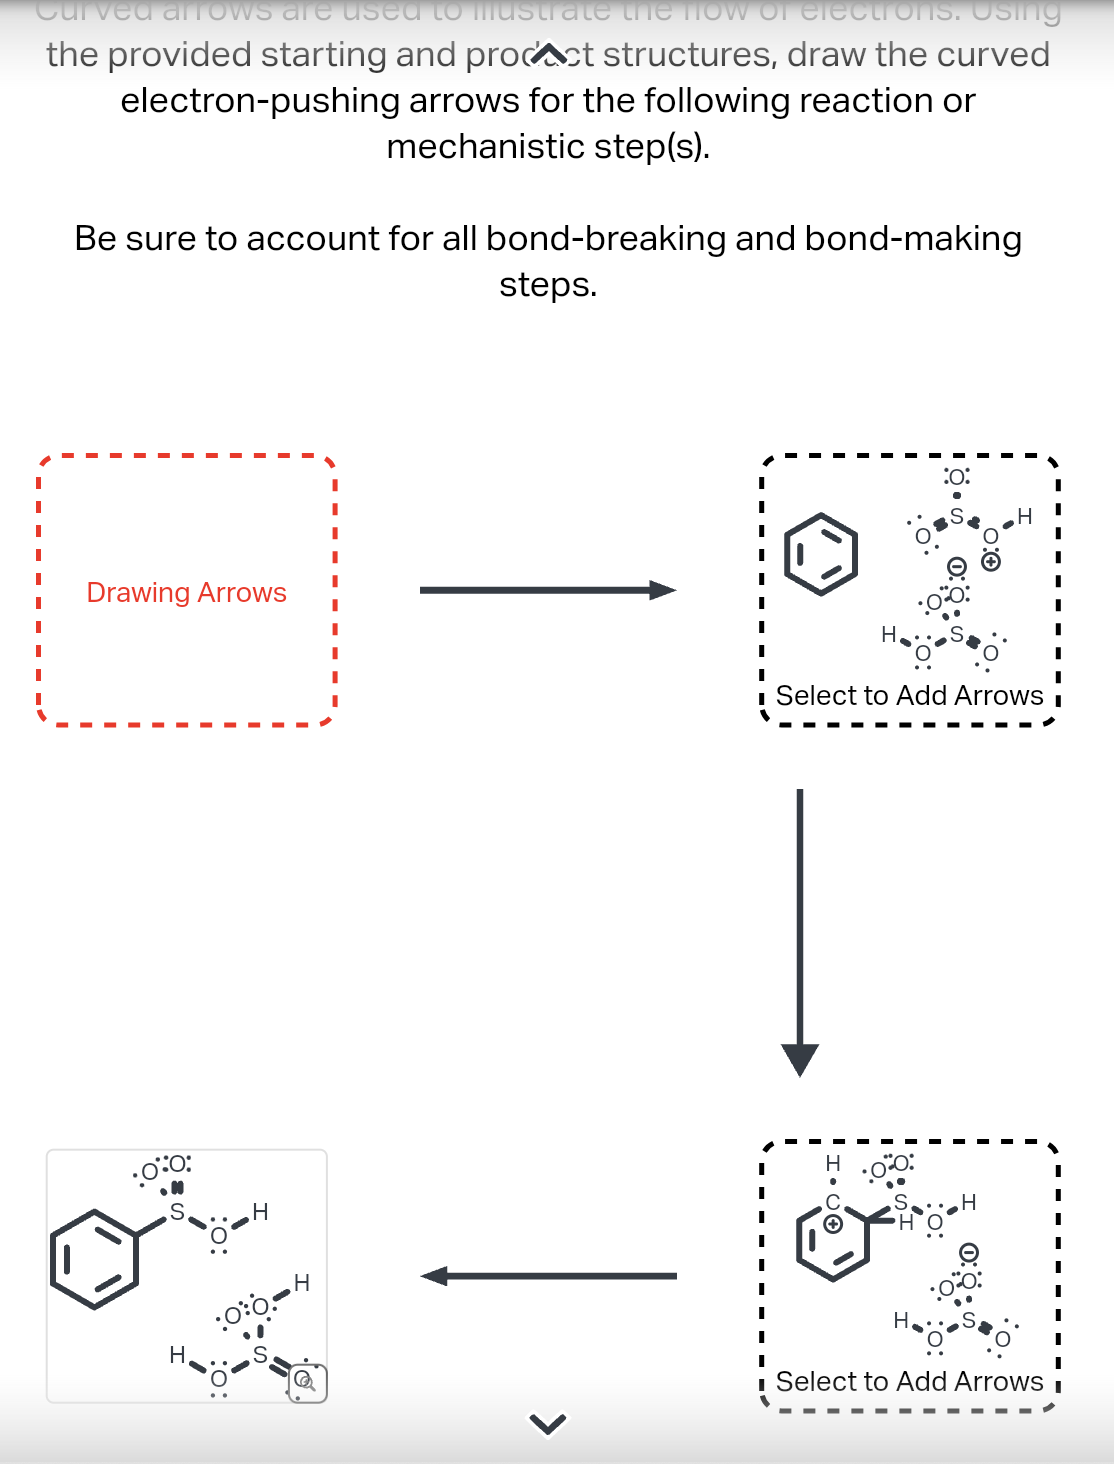 Curved arrows are used to mustrate the flow of electrons. Using
the provided starting and procct structures, draw the curved
electron-pushing arrows for the following reaction or
mechanistic step(s).
Be sure to account for all bond-breaking and bond-making
steps.
Drawing Arrows
0:0:
H
H
H
:00-
<
:0:
Select to Add Arrows
00:
I
I
I
■ Select to Add Arrows i